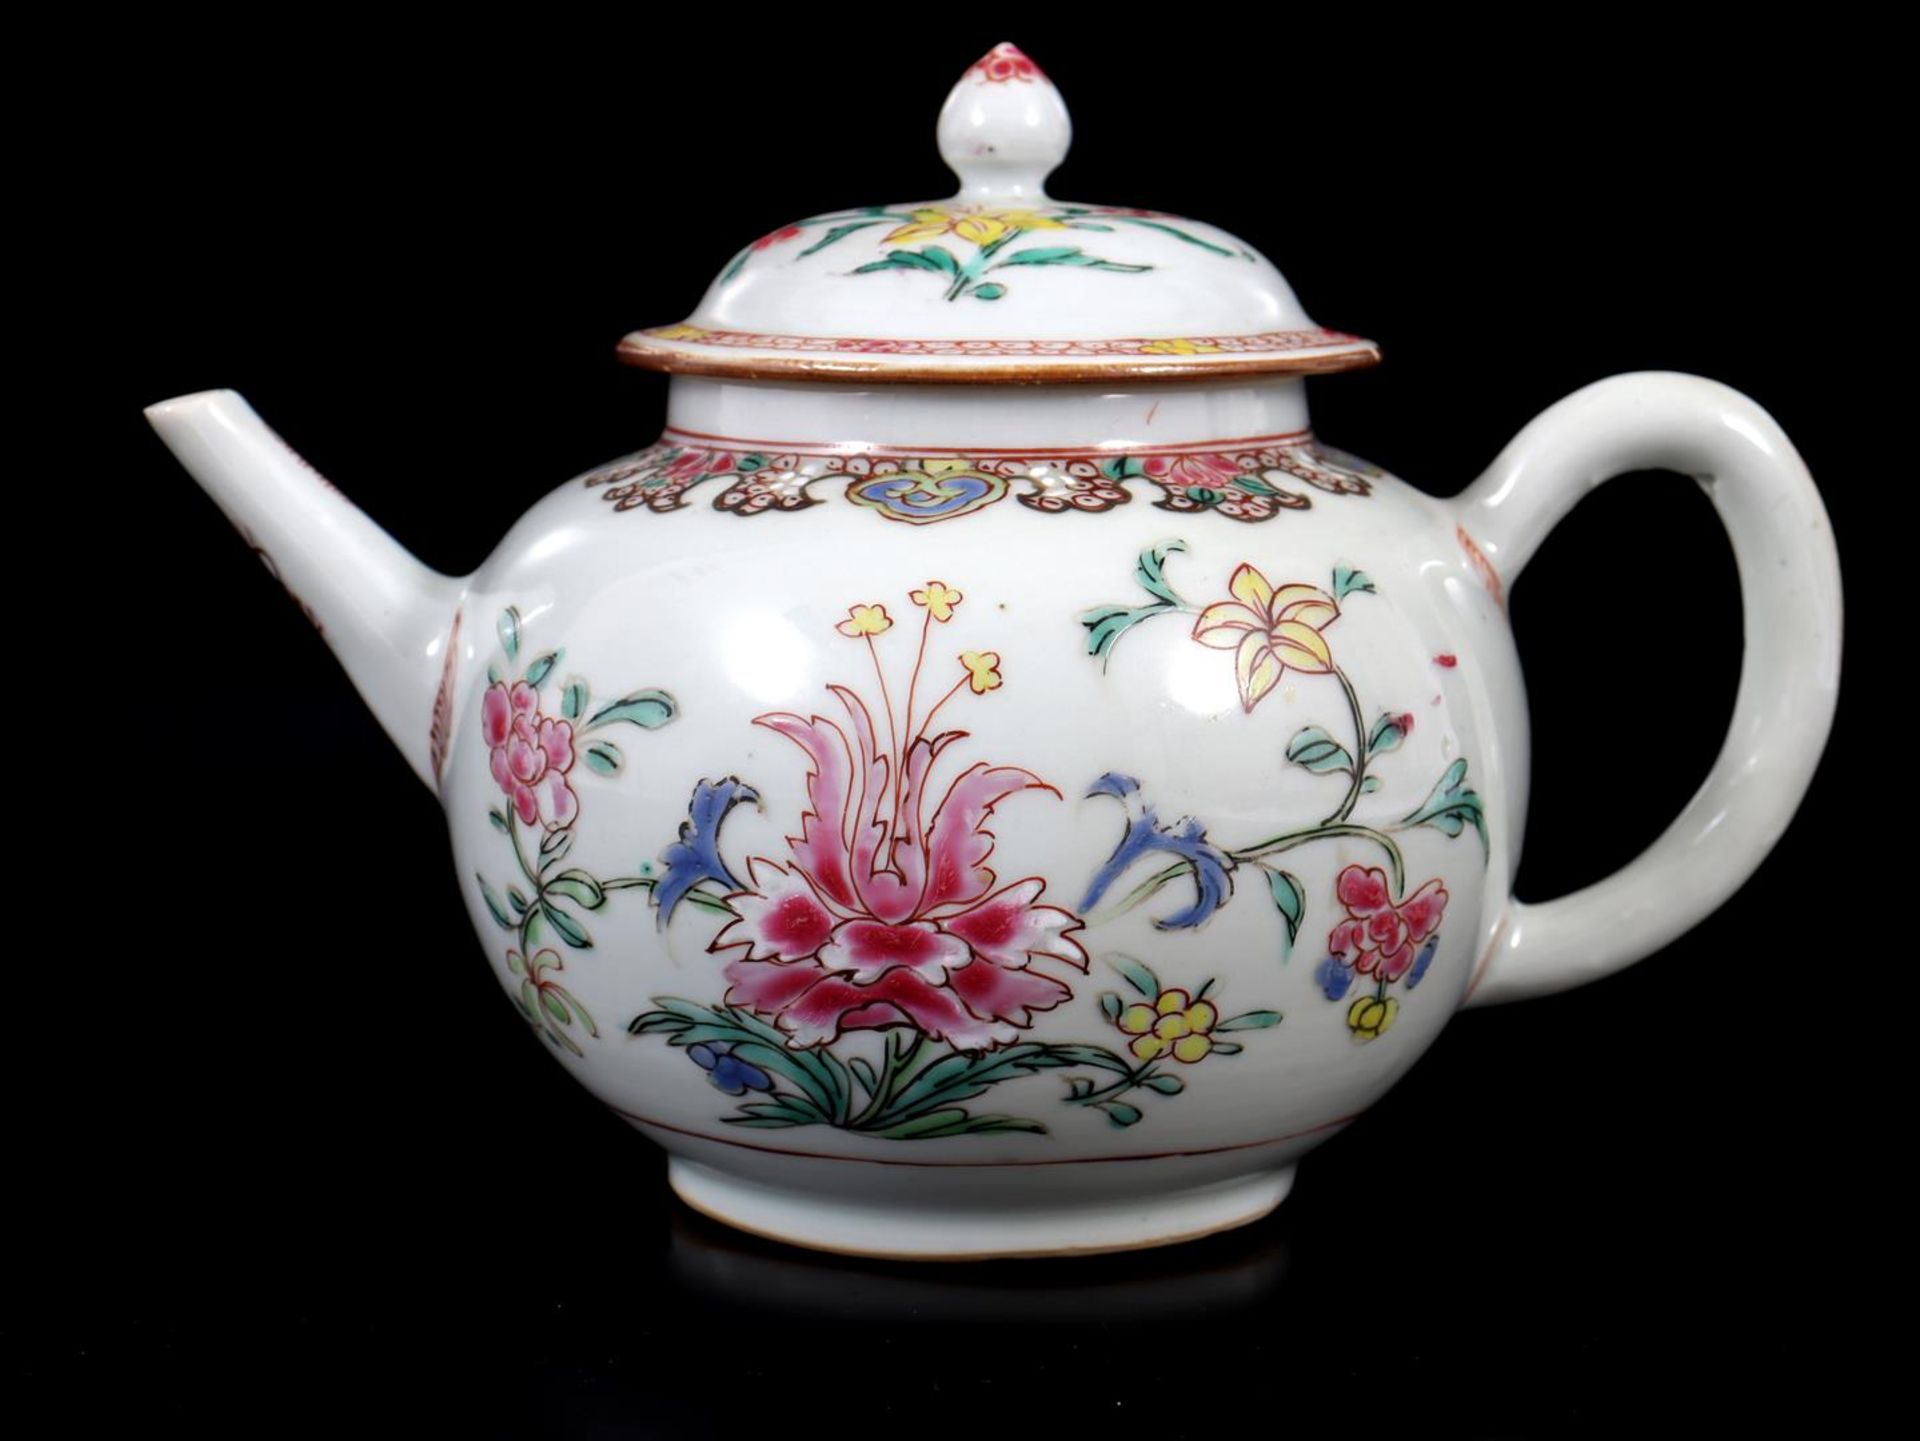 Chinese porcelain teapot with Famille Rose decoration - Image 2 of 2